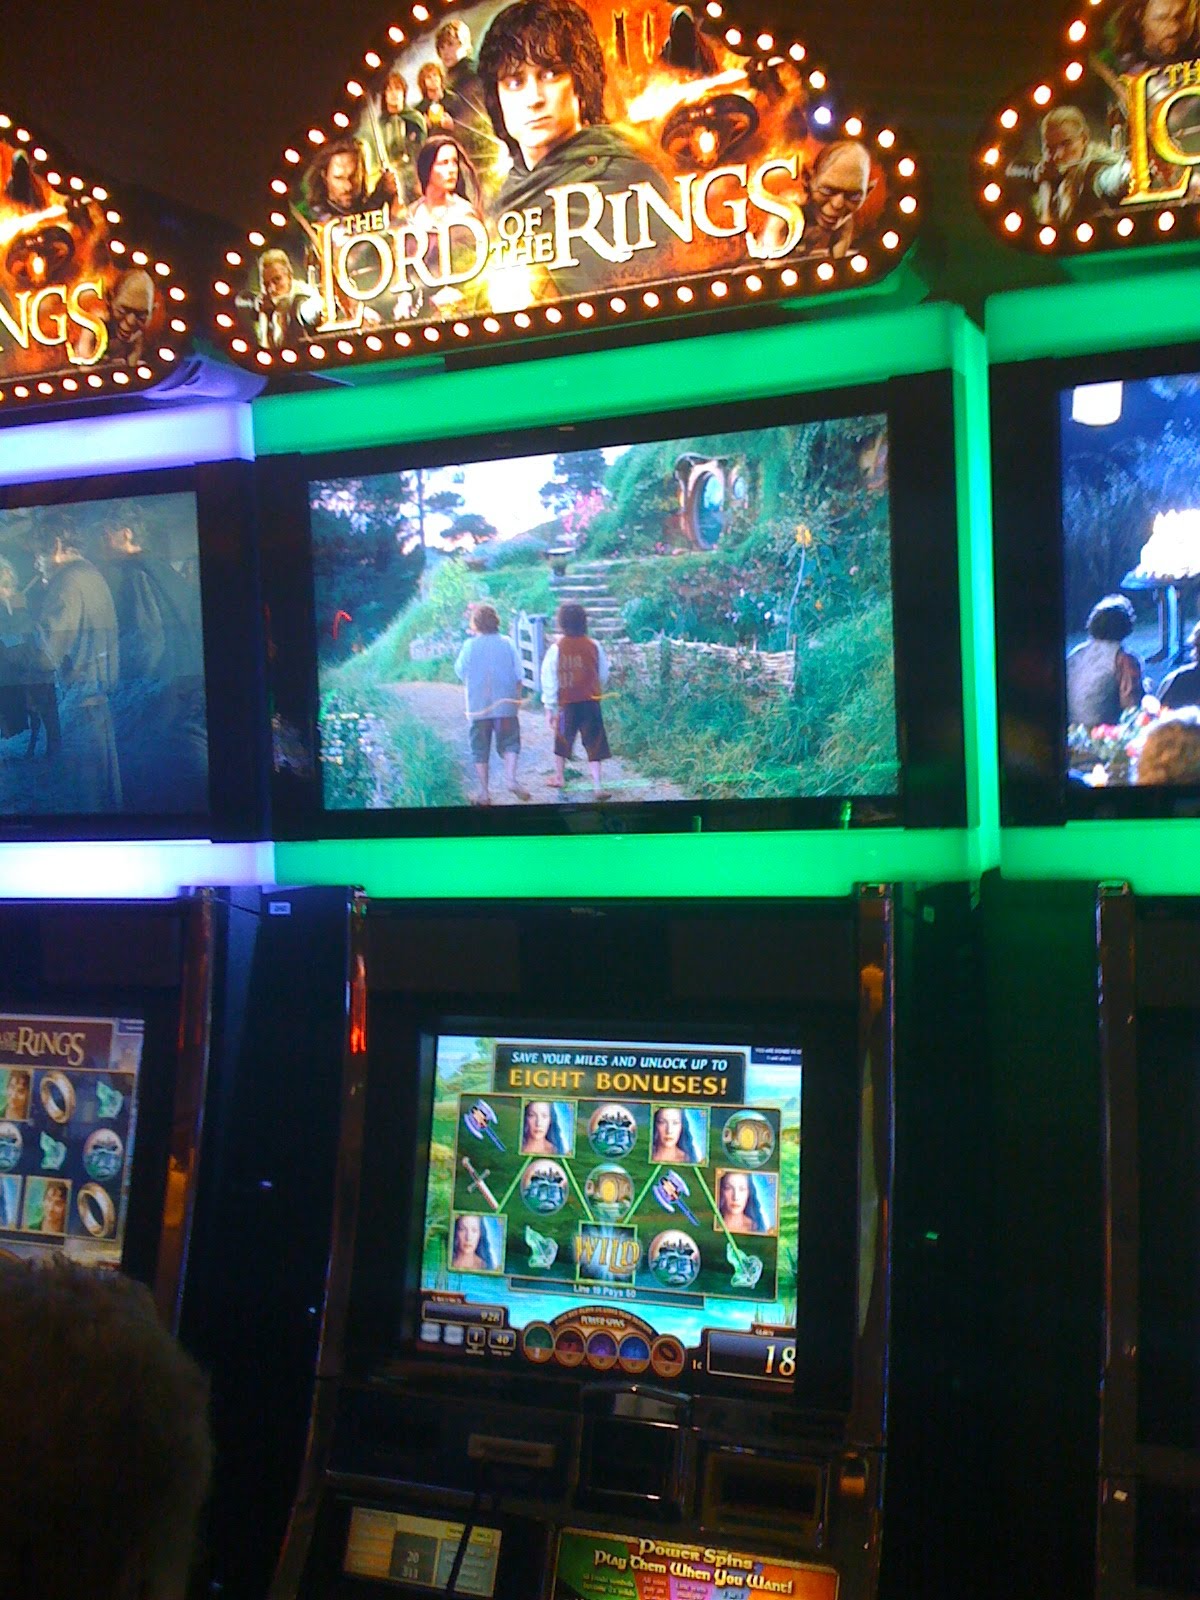 Lord Of The Rings Slot Machine